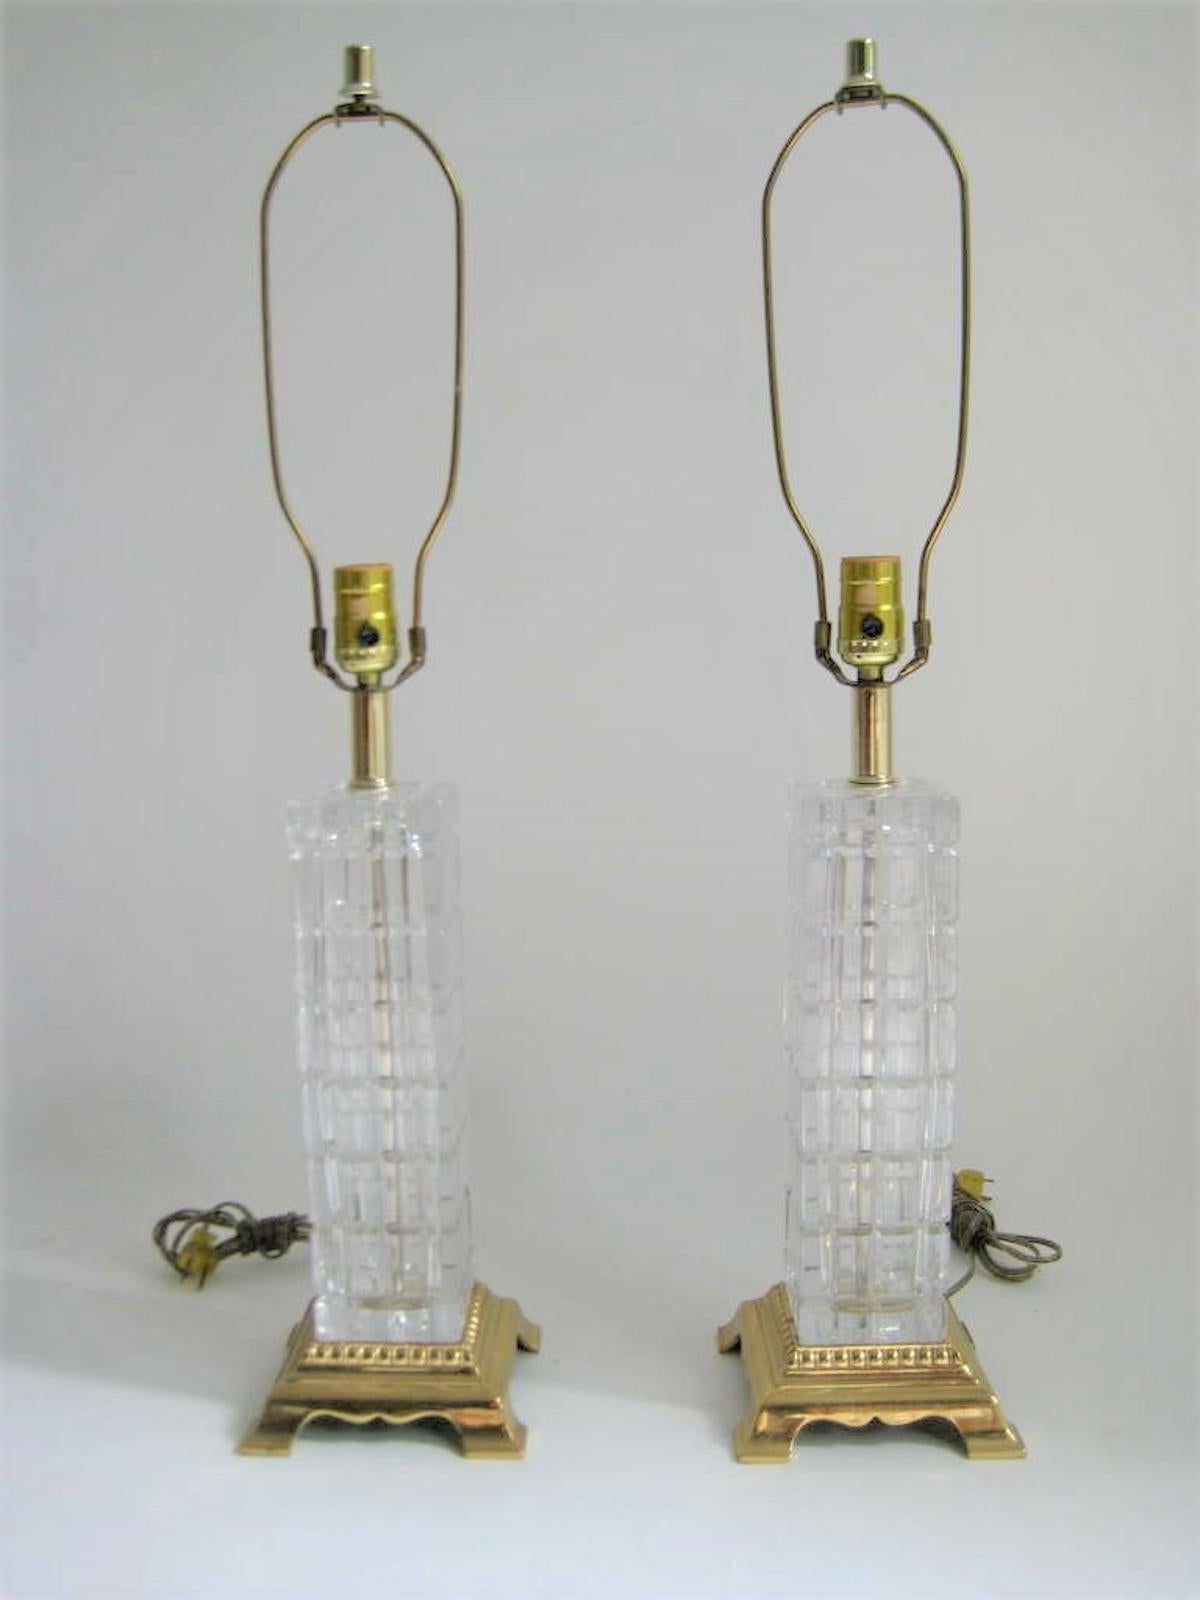 Elegant Pair of Glass and Brass Table Lamps. Sturdy/ Heavy in weight. Solid Brass Bottom Base. Excellent condition. 
Height of base only - from bottom to harp is 15 inches. 
Height including harp is 27.5 inches